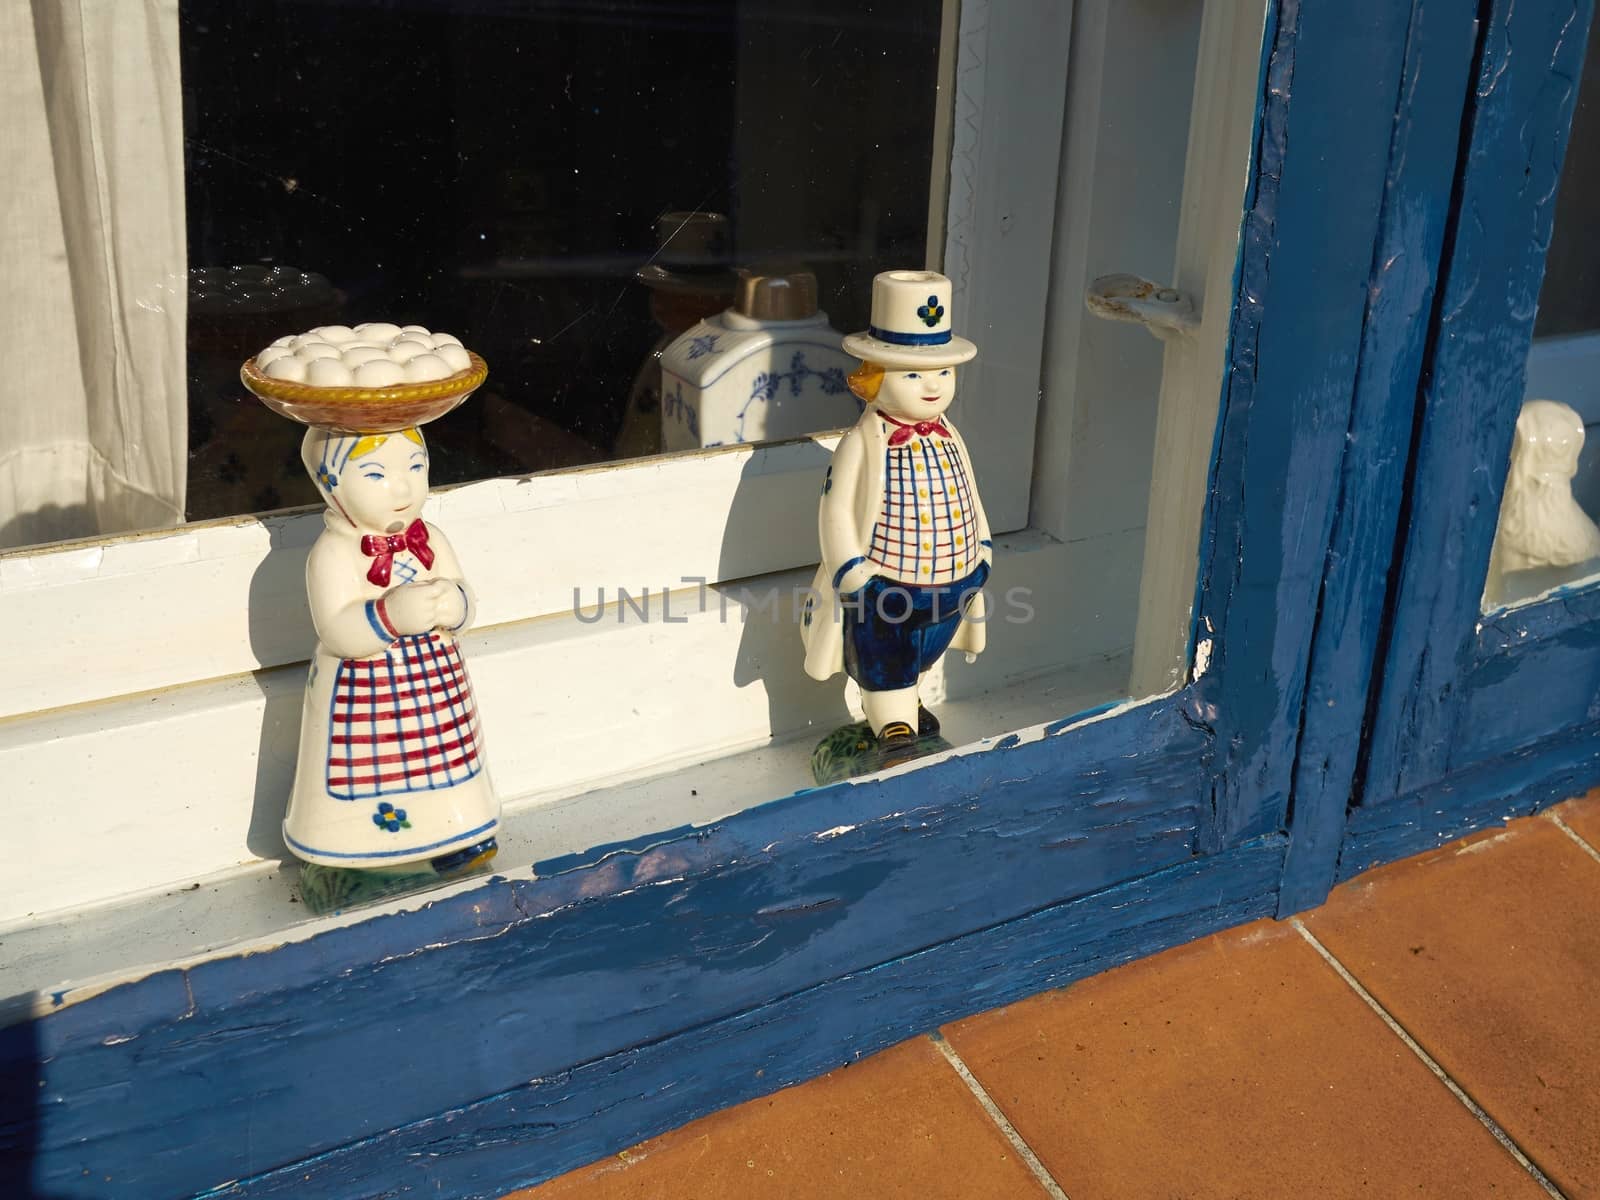 Classical European porcelain figurines in a window by Ronyzmbow